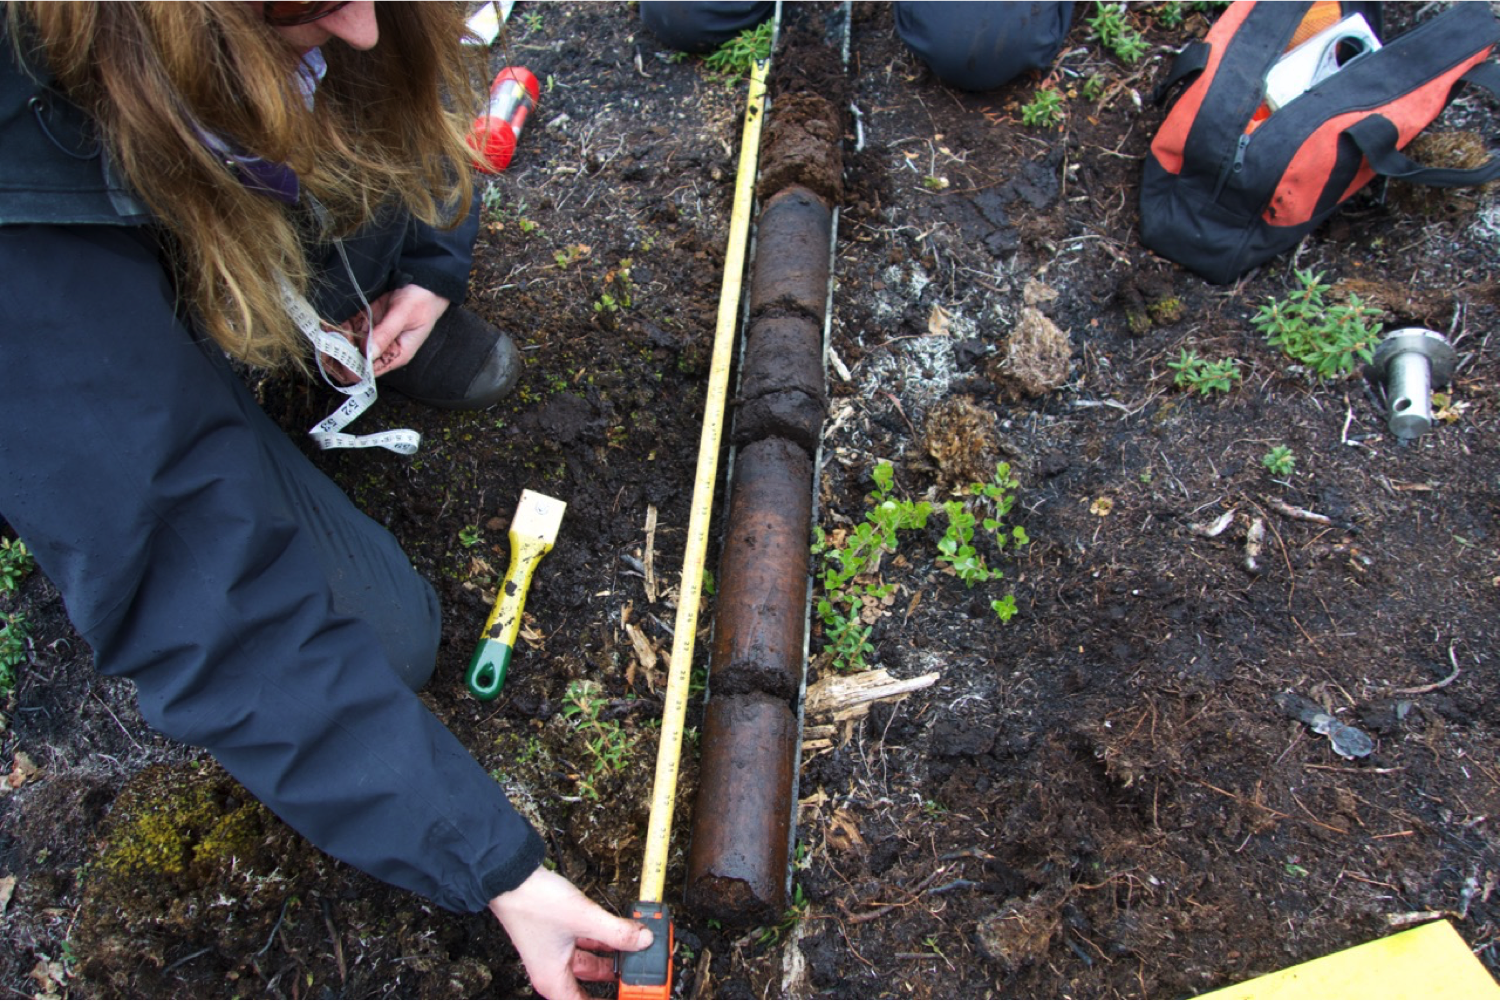 As part of research on Arctic wildfires, Merritt Turetsky inspects a long soil core at a field site in the Northwest Territories, Canada.